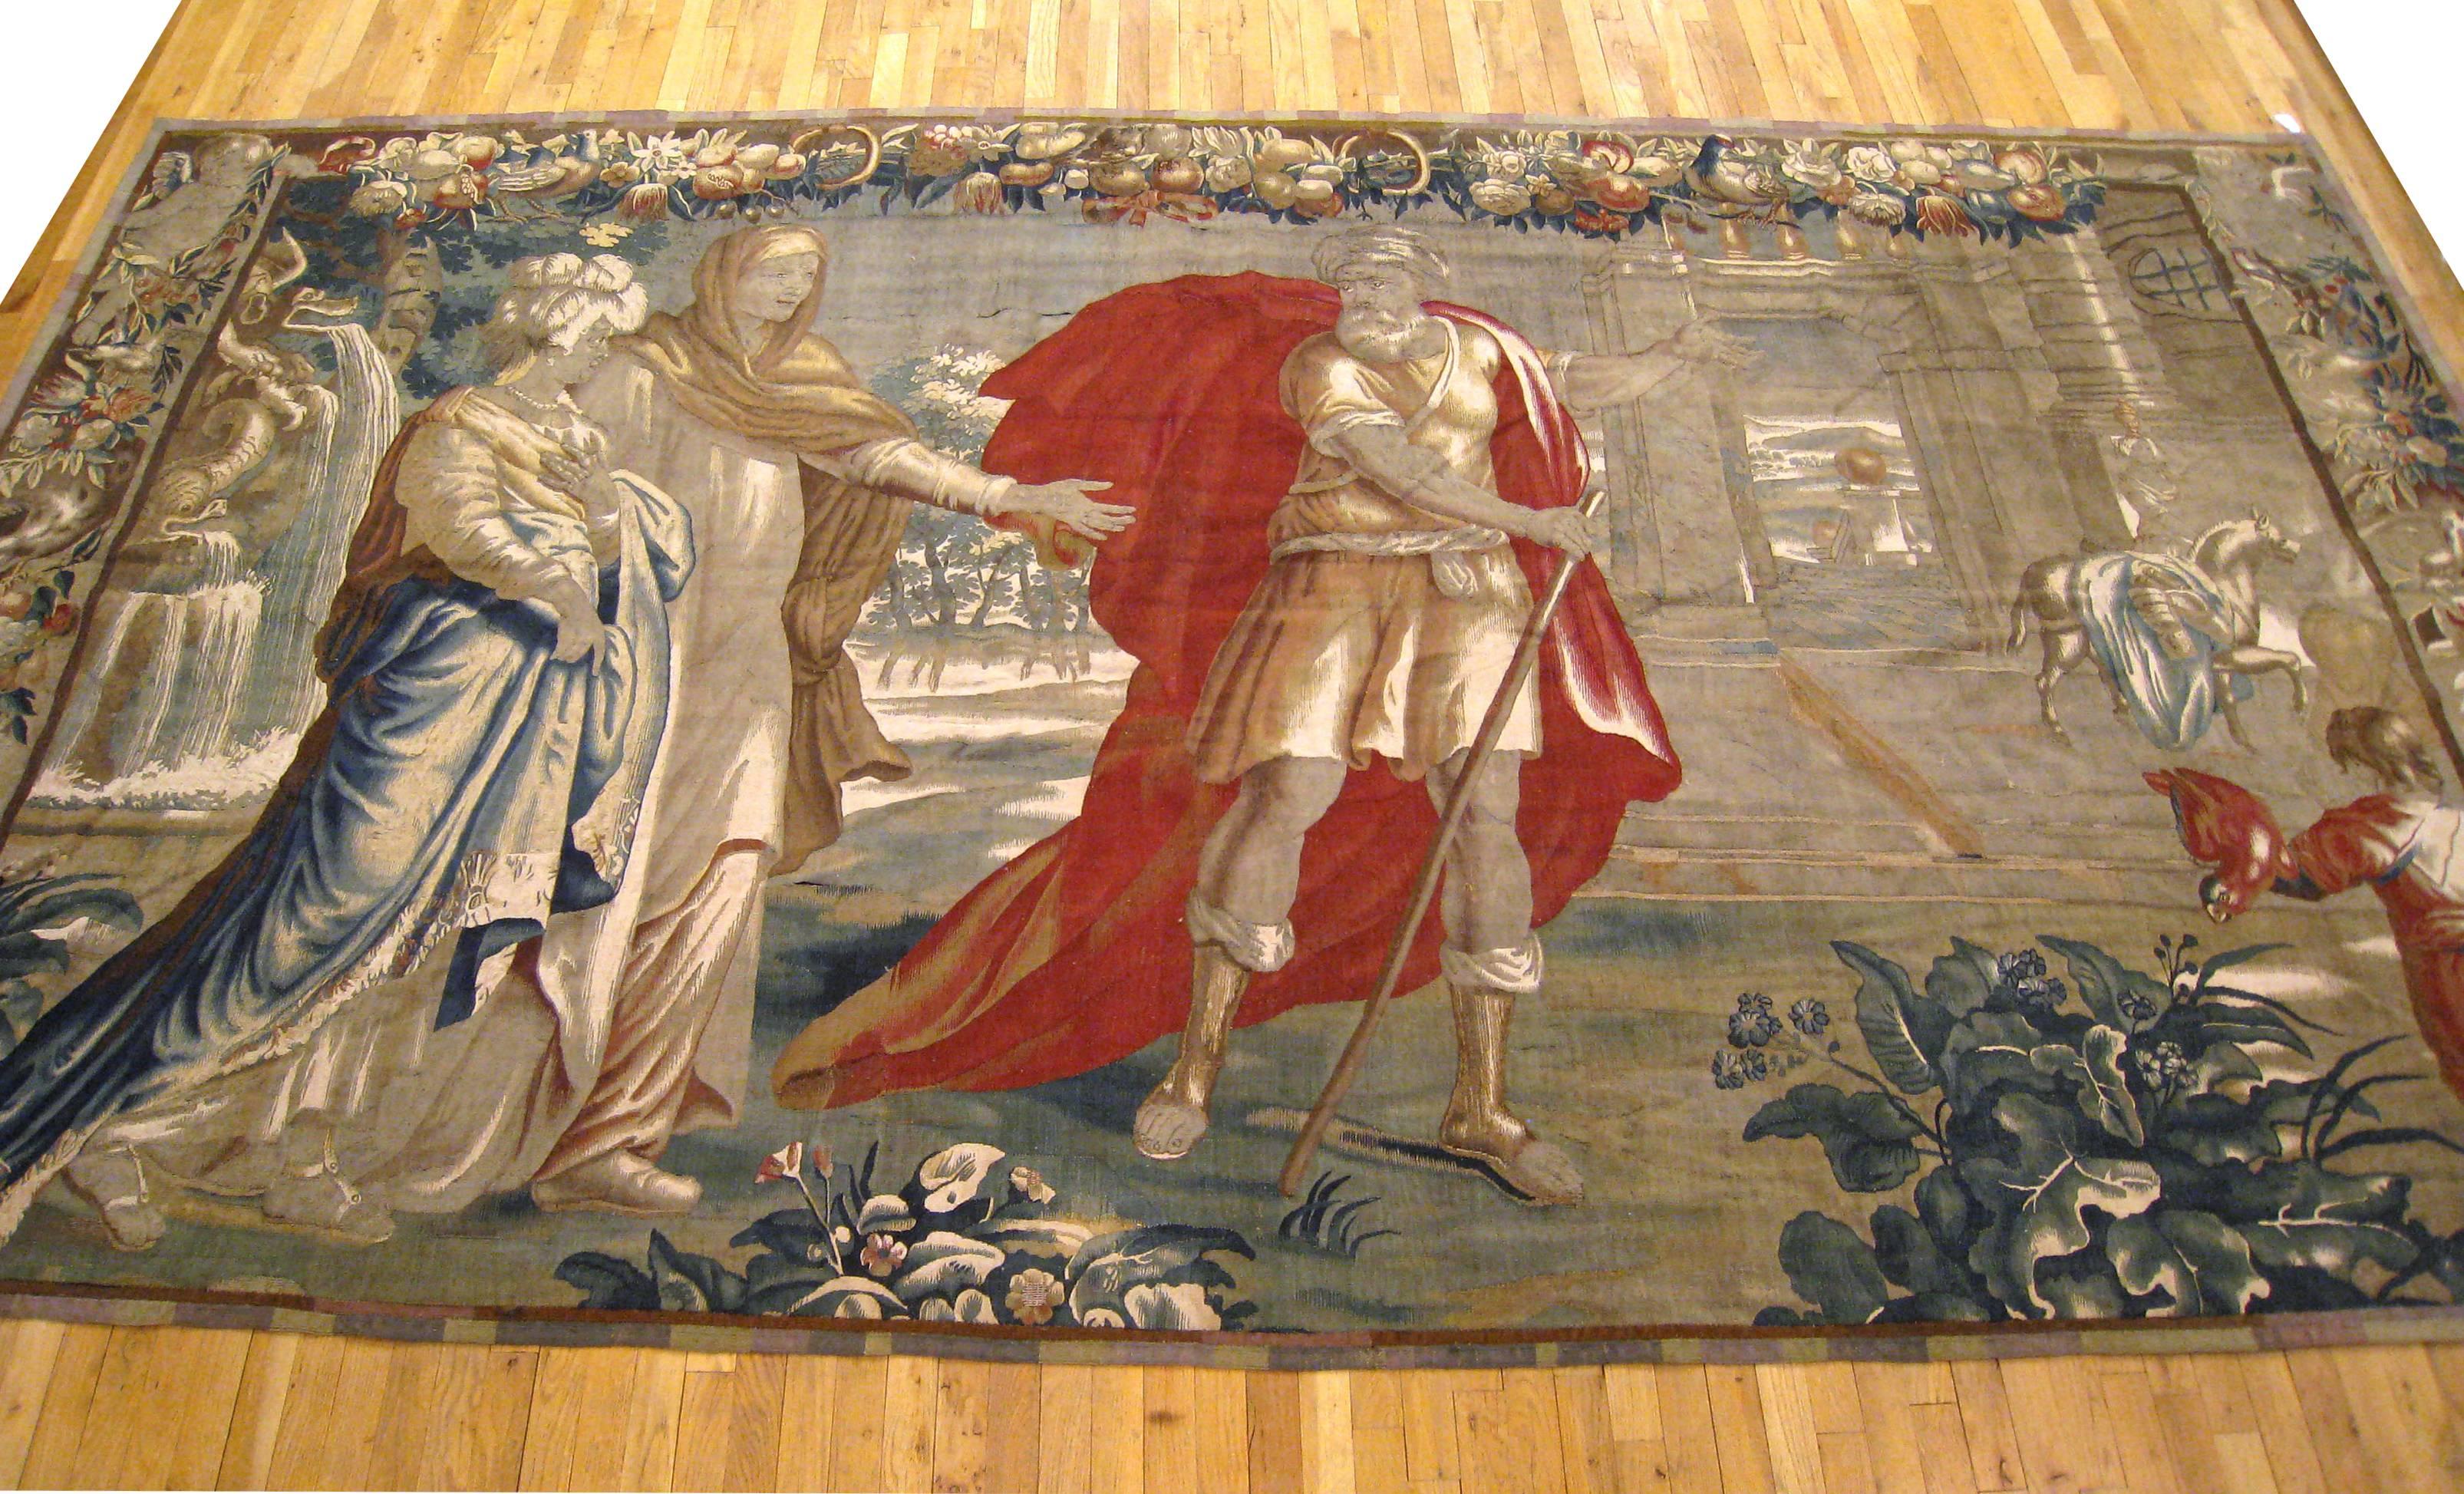 An antique 18th century Flemish Historical Tapestry, size 7'8 H x 13'4 W. This period European tapestry depicts the Roman general, Coriolanus, being pleaded with by his wife Virgilia and his mother Volumnia as he prepares to return to the